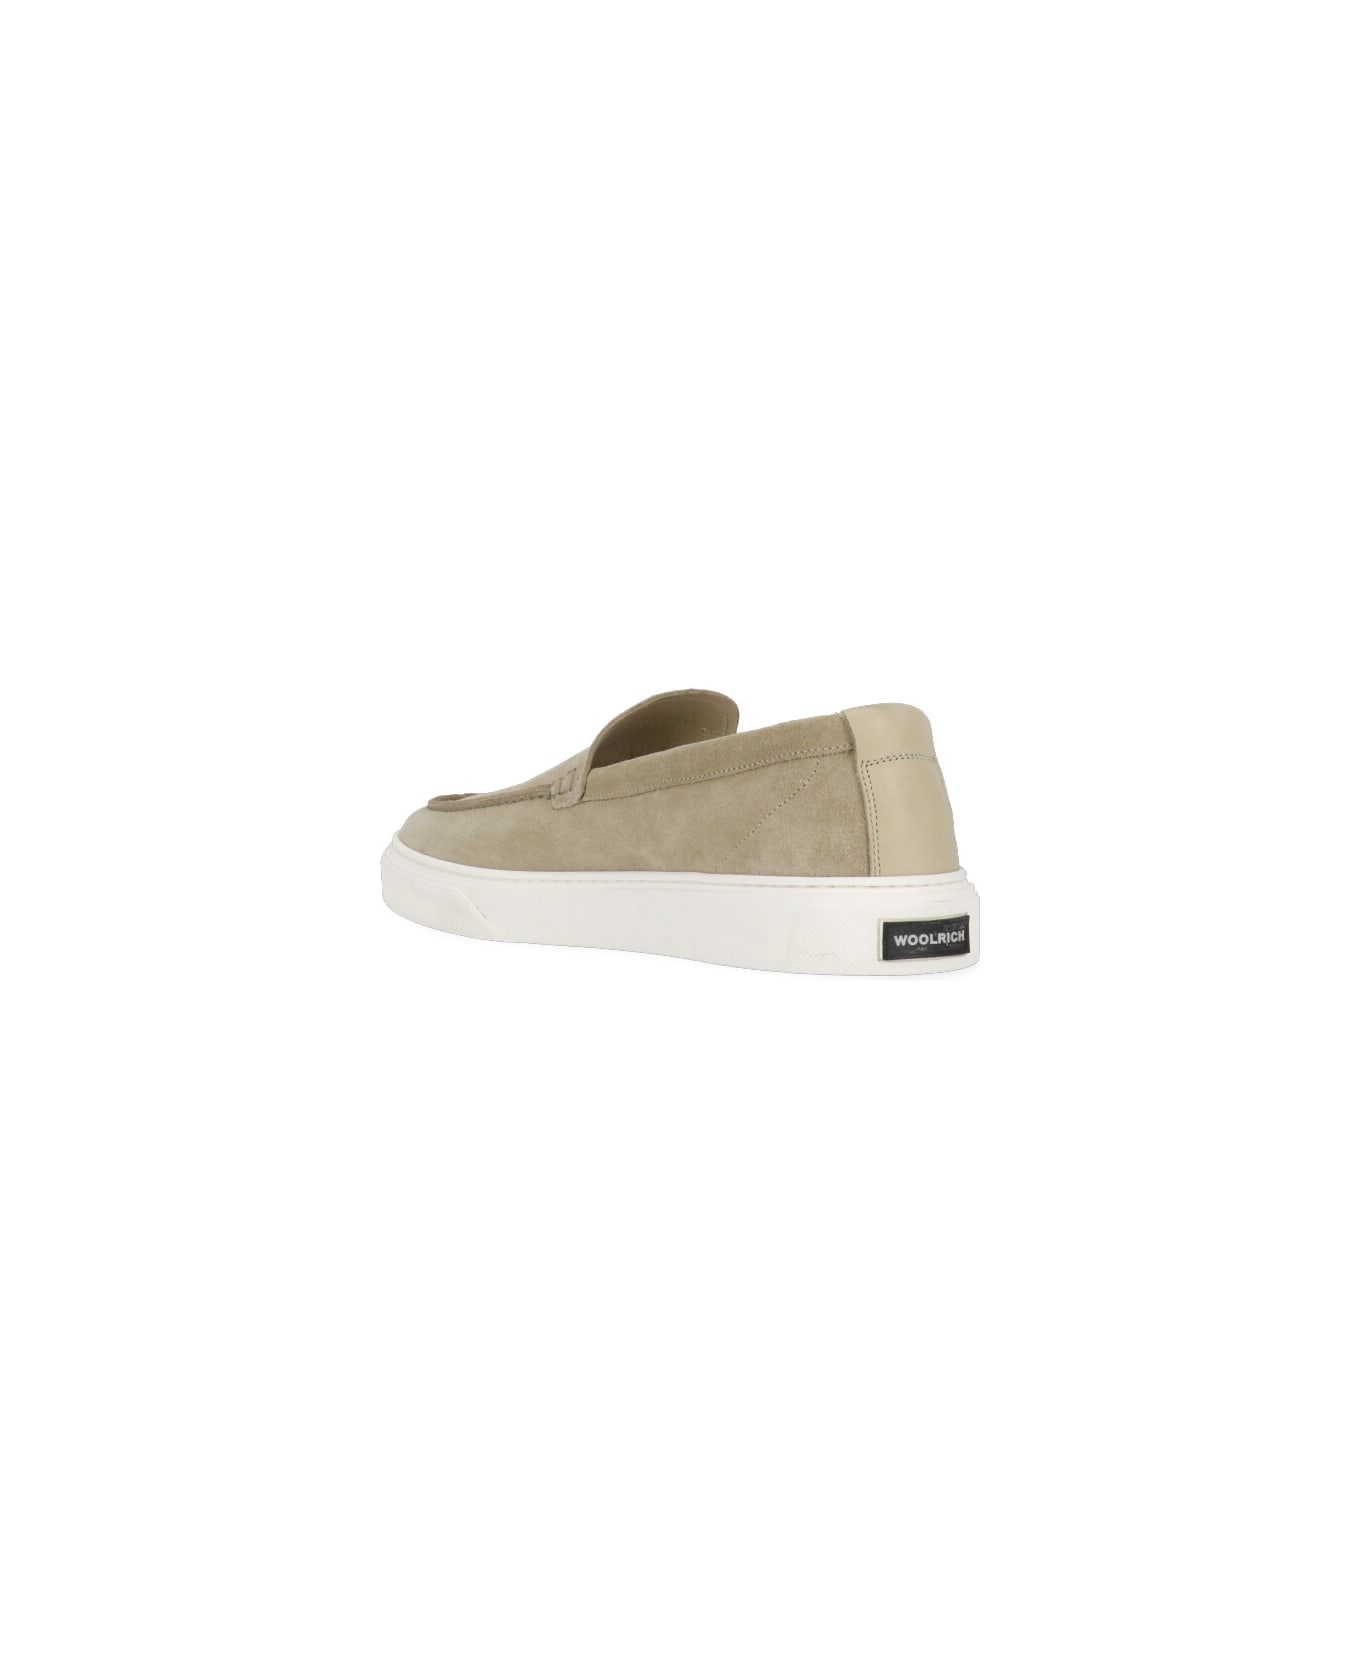 Woolrich Suede Leather Loafers - Beige